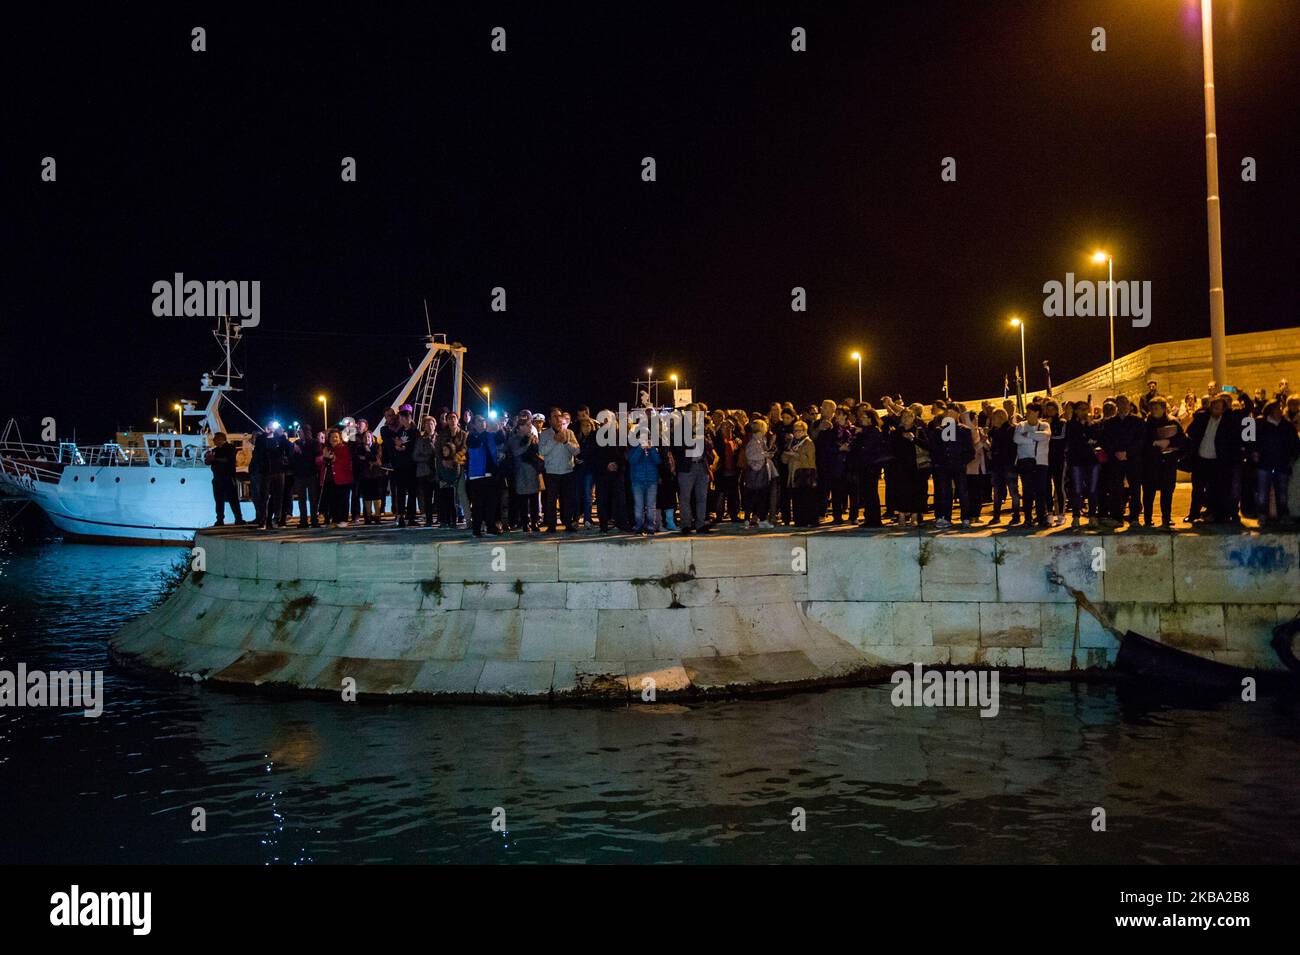 People observe the fishing boats in the Port of Molfetta, on the occasion of the 25th anniversary of the disappearance of the fishing boat Francesco Padre with its crew, in Molfetta, Italy, on November 4, 2019. On 4 November 1994, the trawler Francesco Padre exploded off the coast of Montenegro with all his human cargo. That night Giovanni Pansini, Saverio Gadaleta, Luigi De Giglio, Francesco Zaza and Mario De Nicolo lost their lives. To remember them on the evening of November 4th, relatives met in church, but also fellow fishermen, representatives of fishermen's associations, the mayor, Tomm Stock Photo